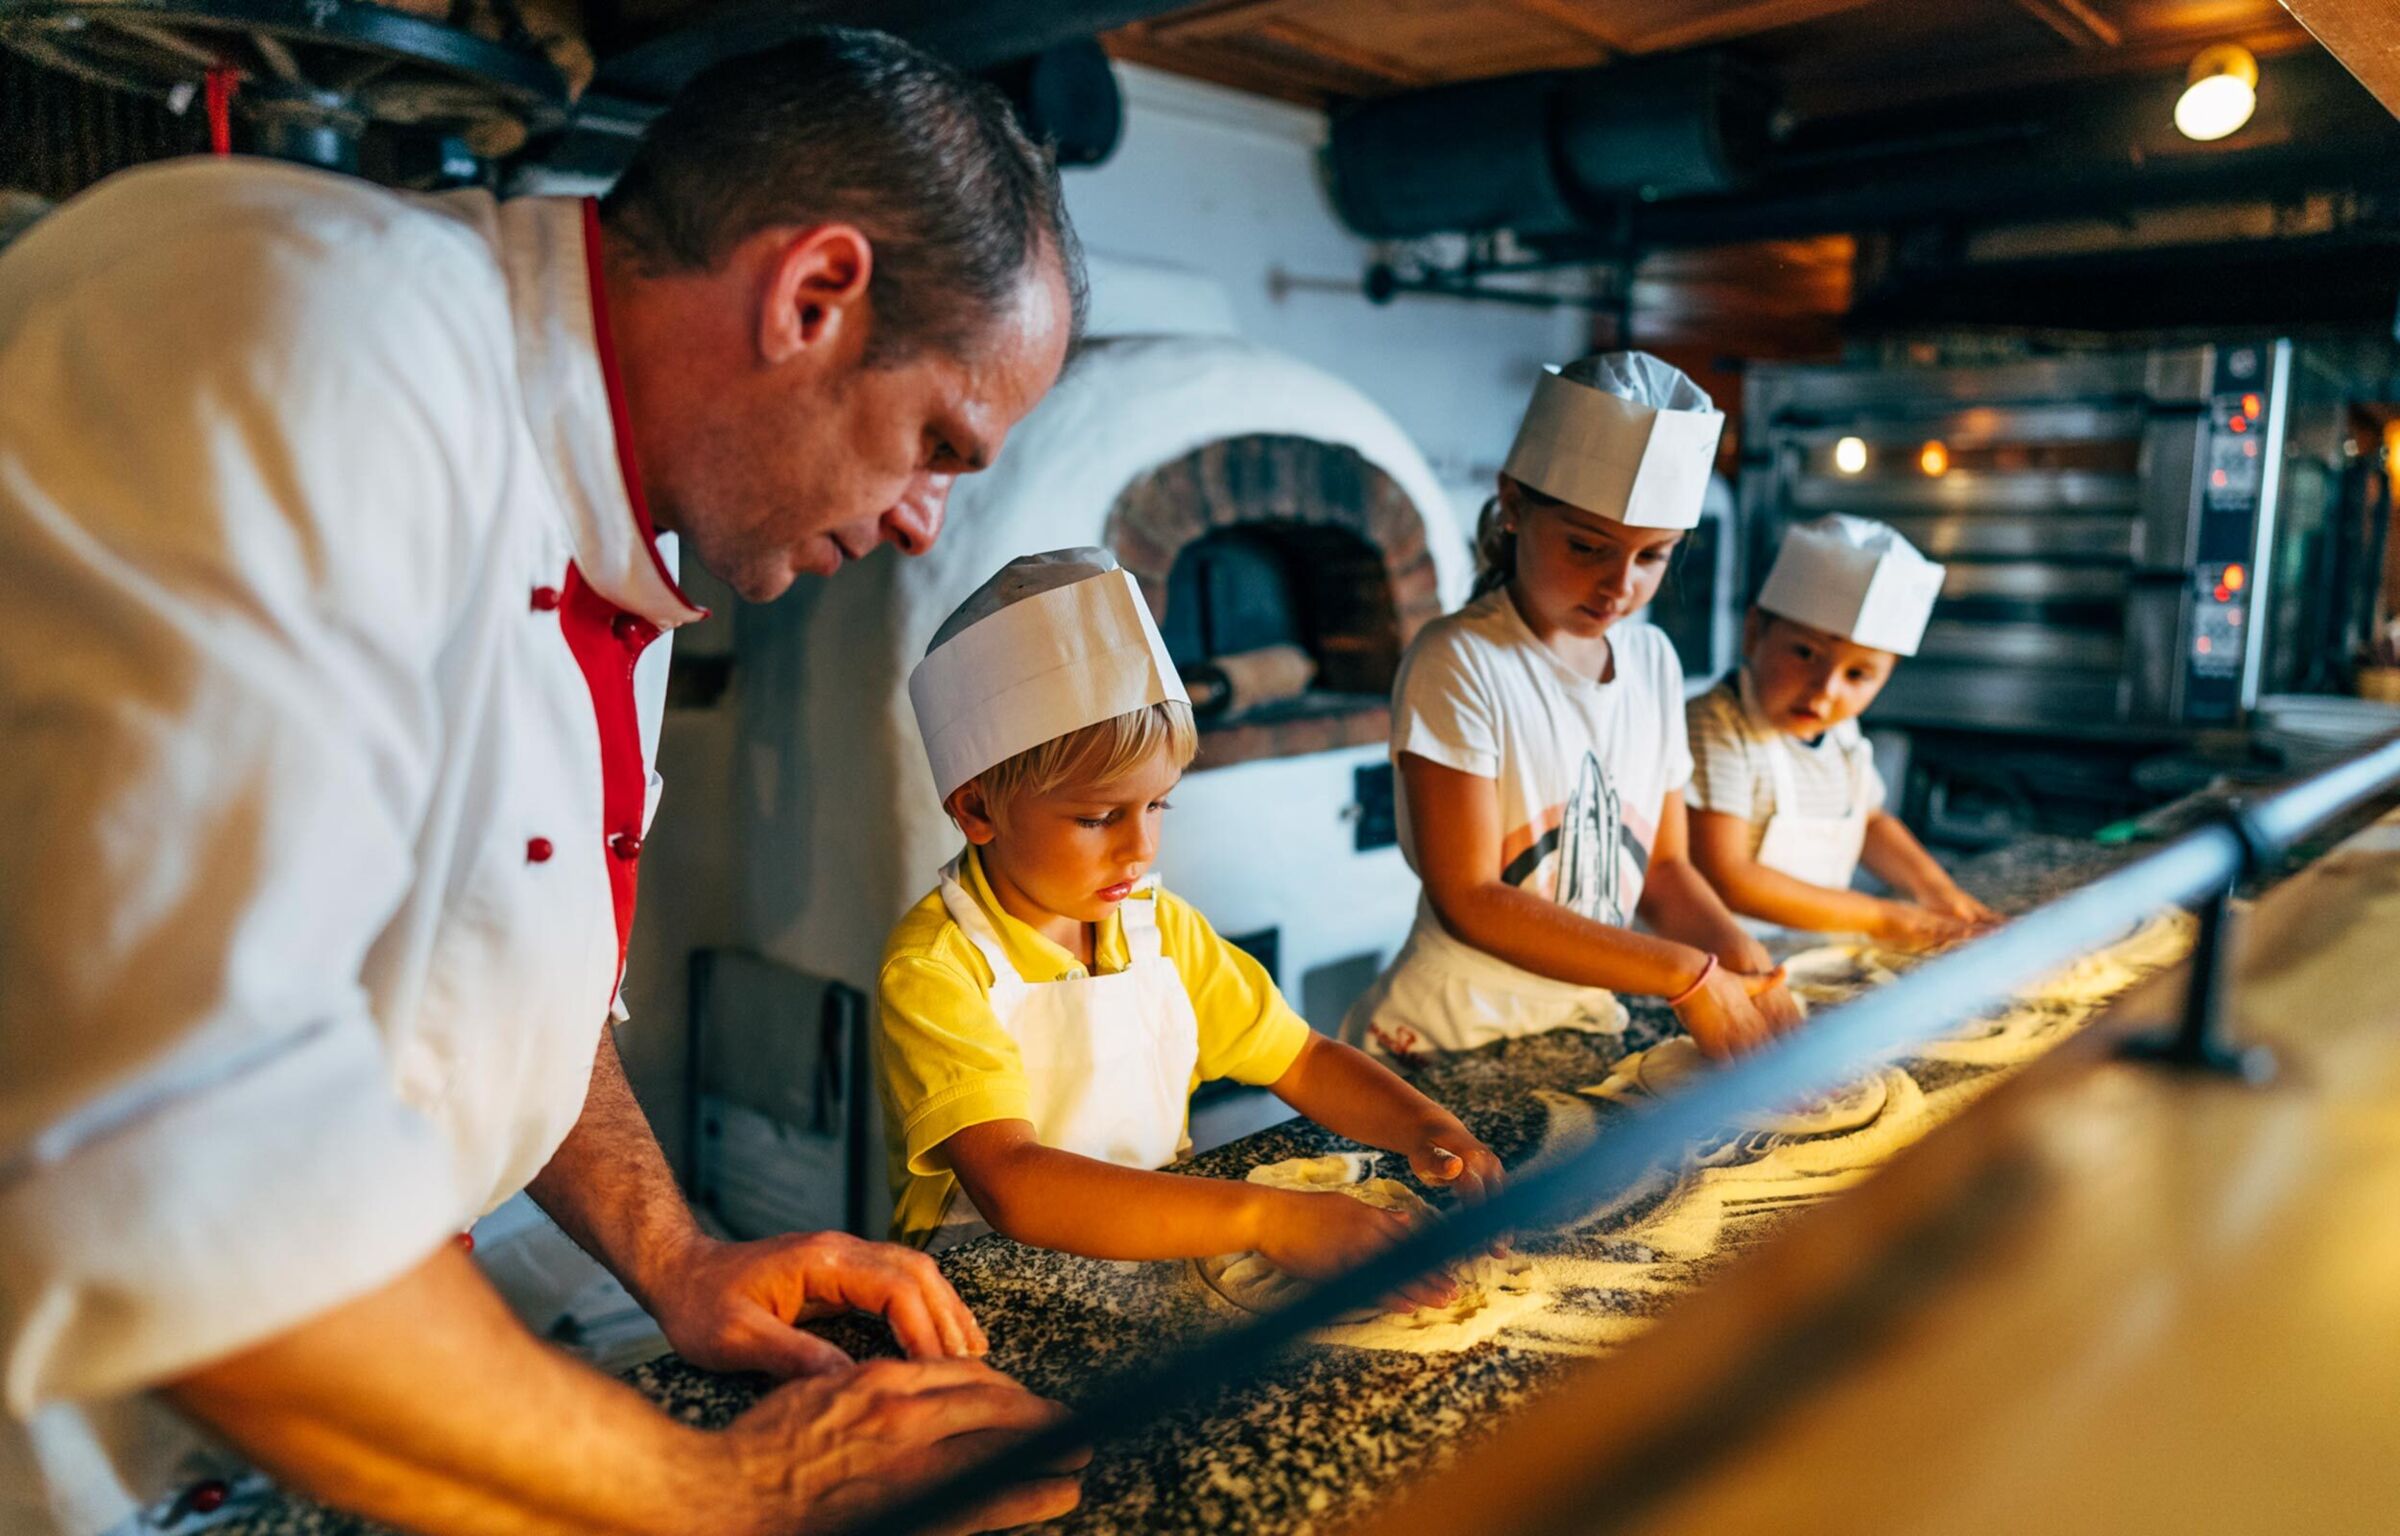 Cook helps children knead the pizza dough.